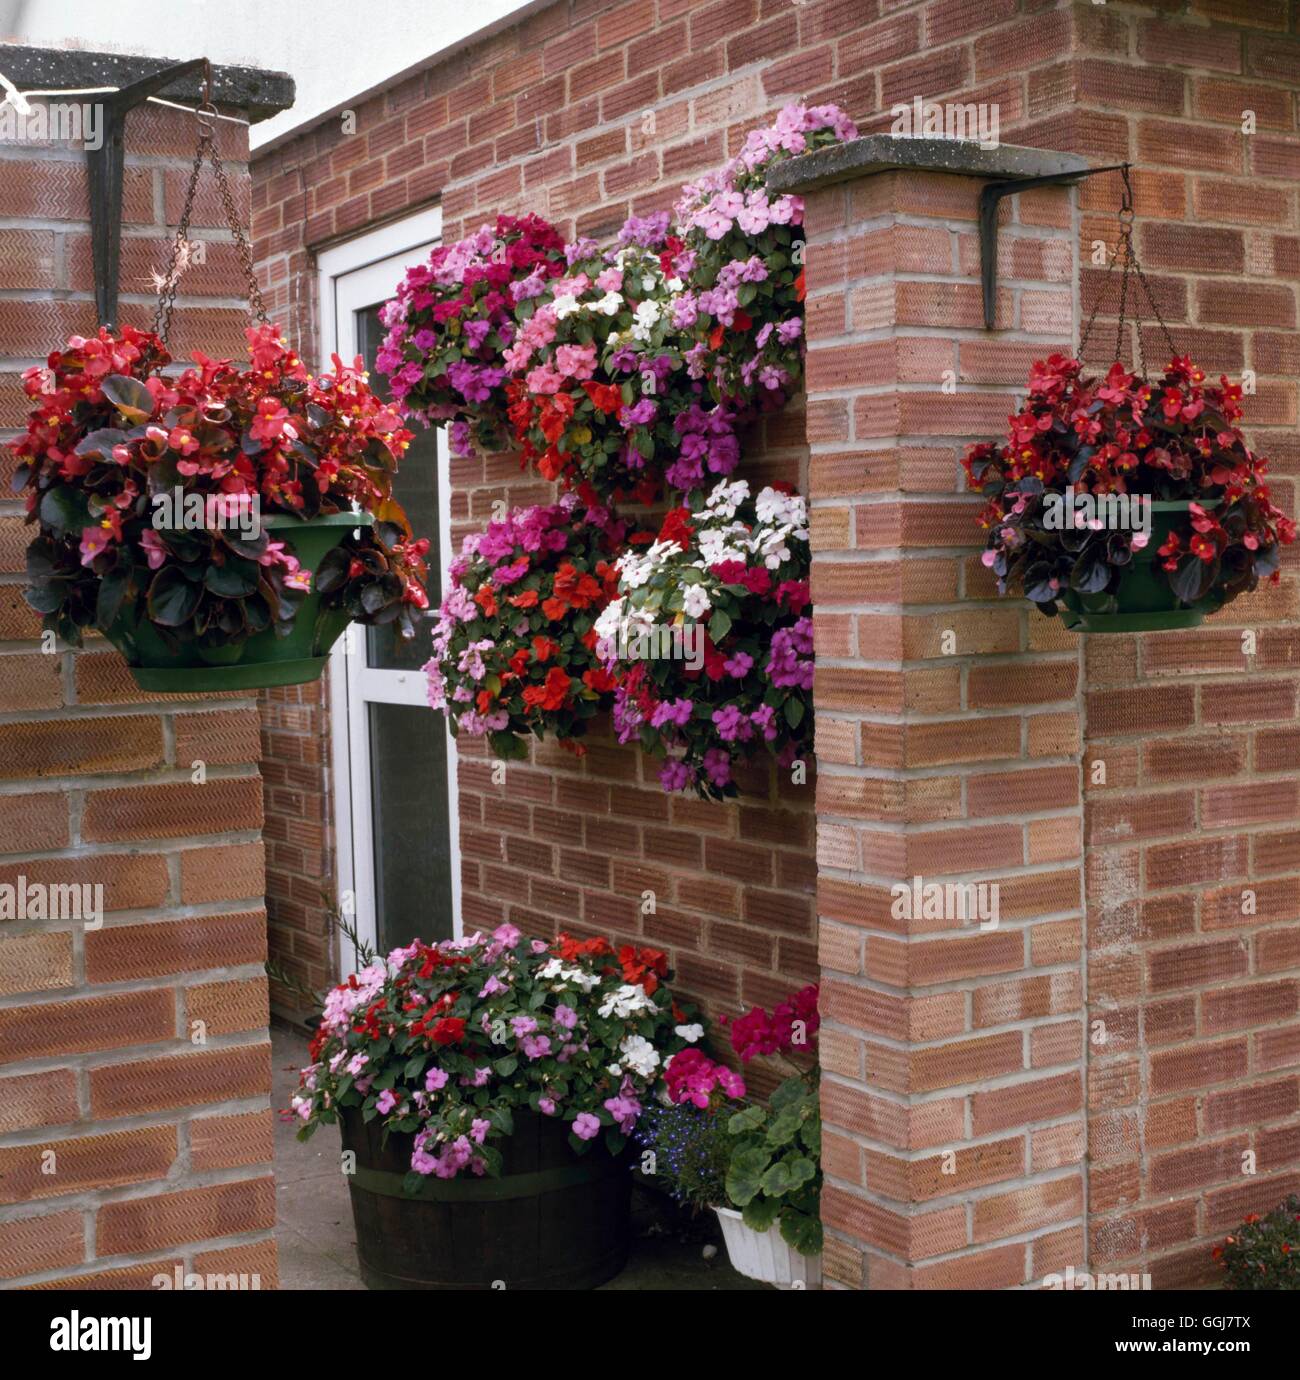 Containers - Annual - planted with Begonias and Impatiens   CTR077829  /Photo Stock Photo